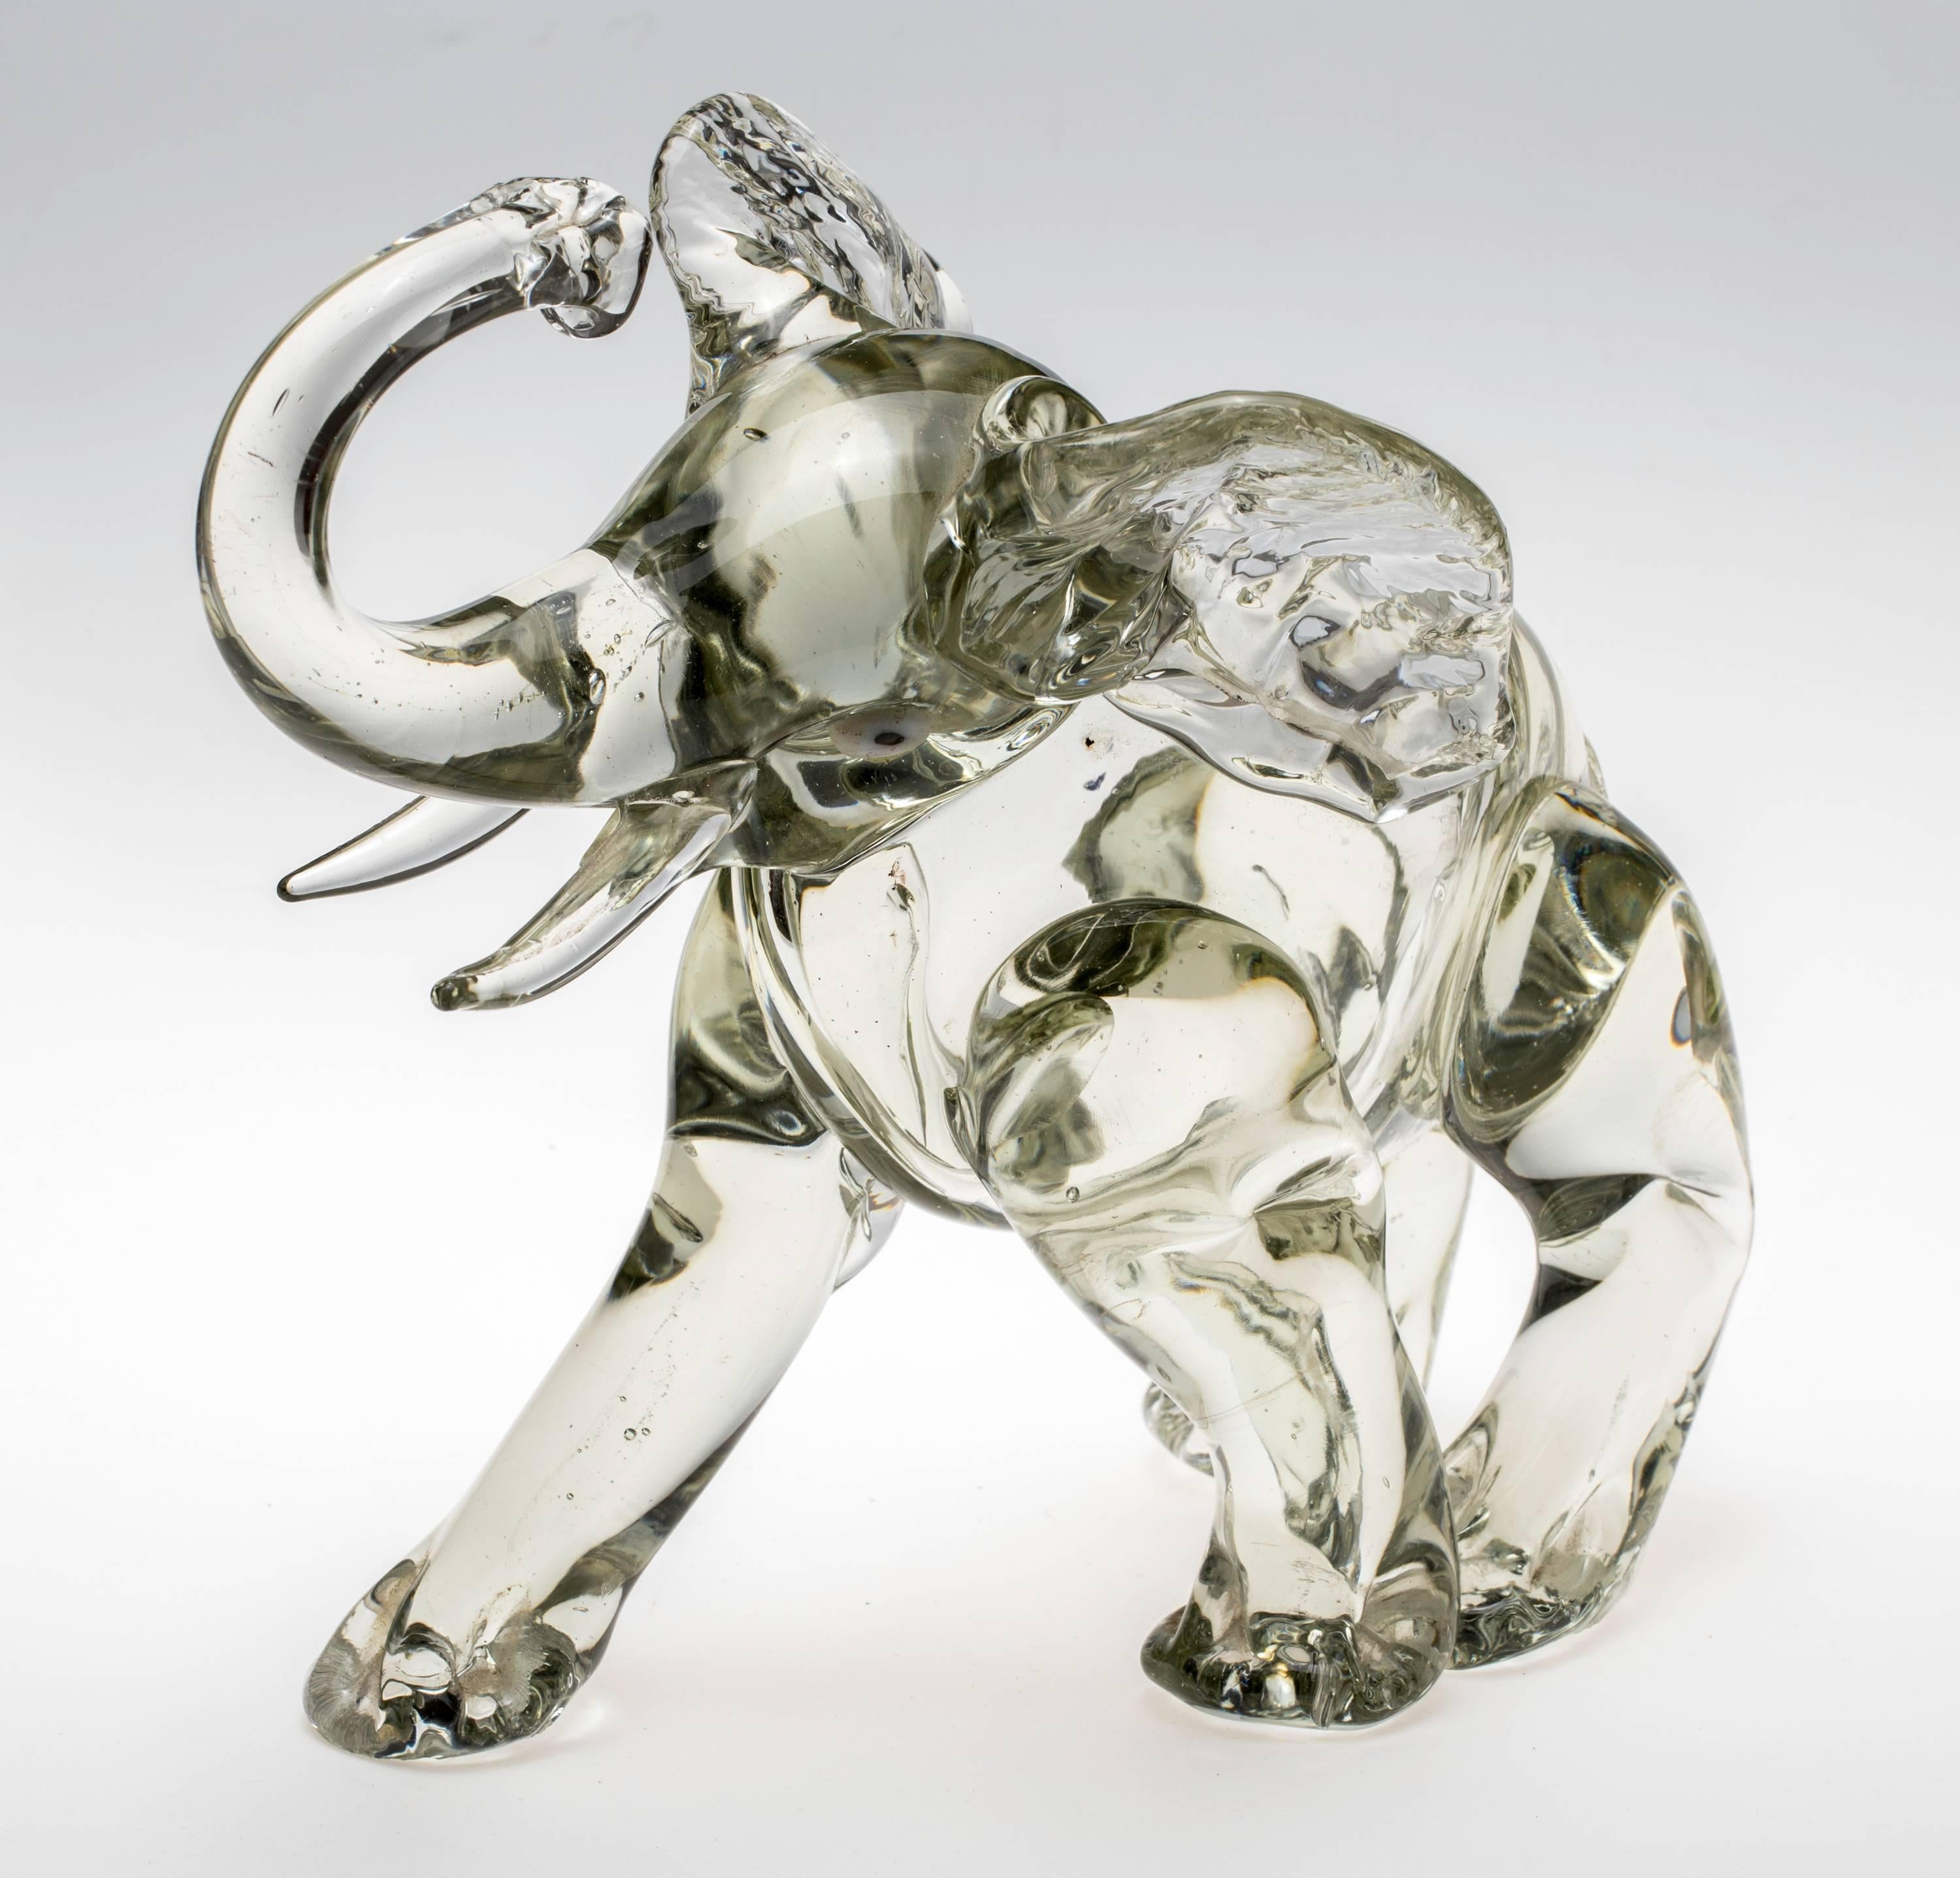 Beautifully made in Italy, Murano glass elephant sitting down on hind legs with its trunk up in the air. Chunky light grey color. Nice to touch.